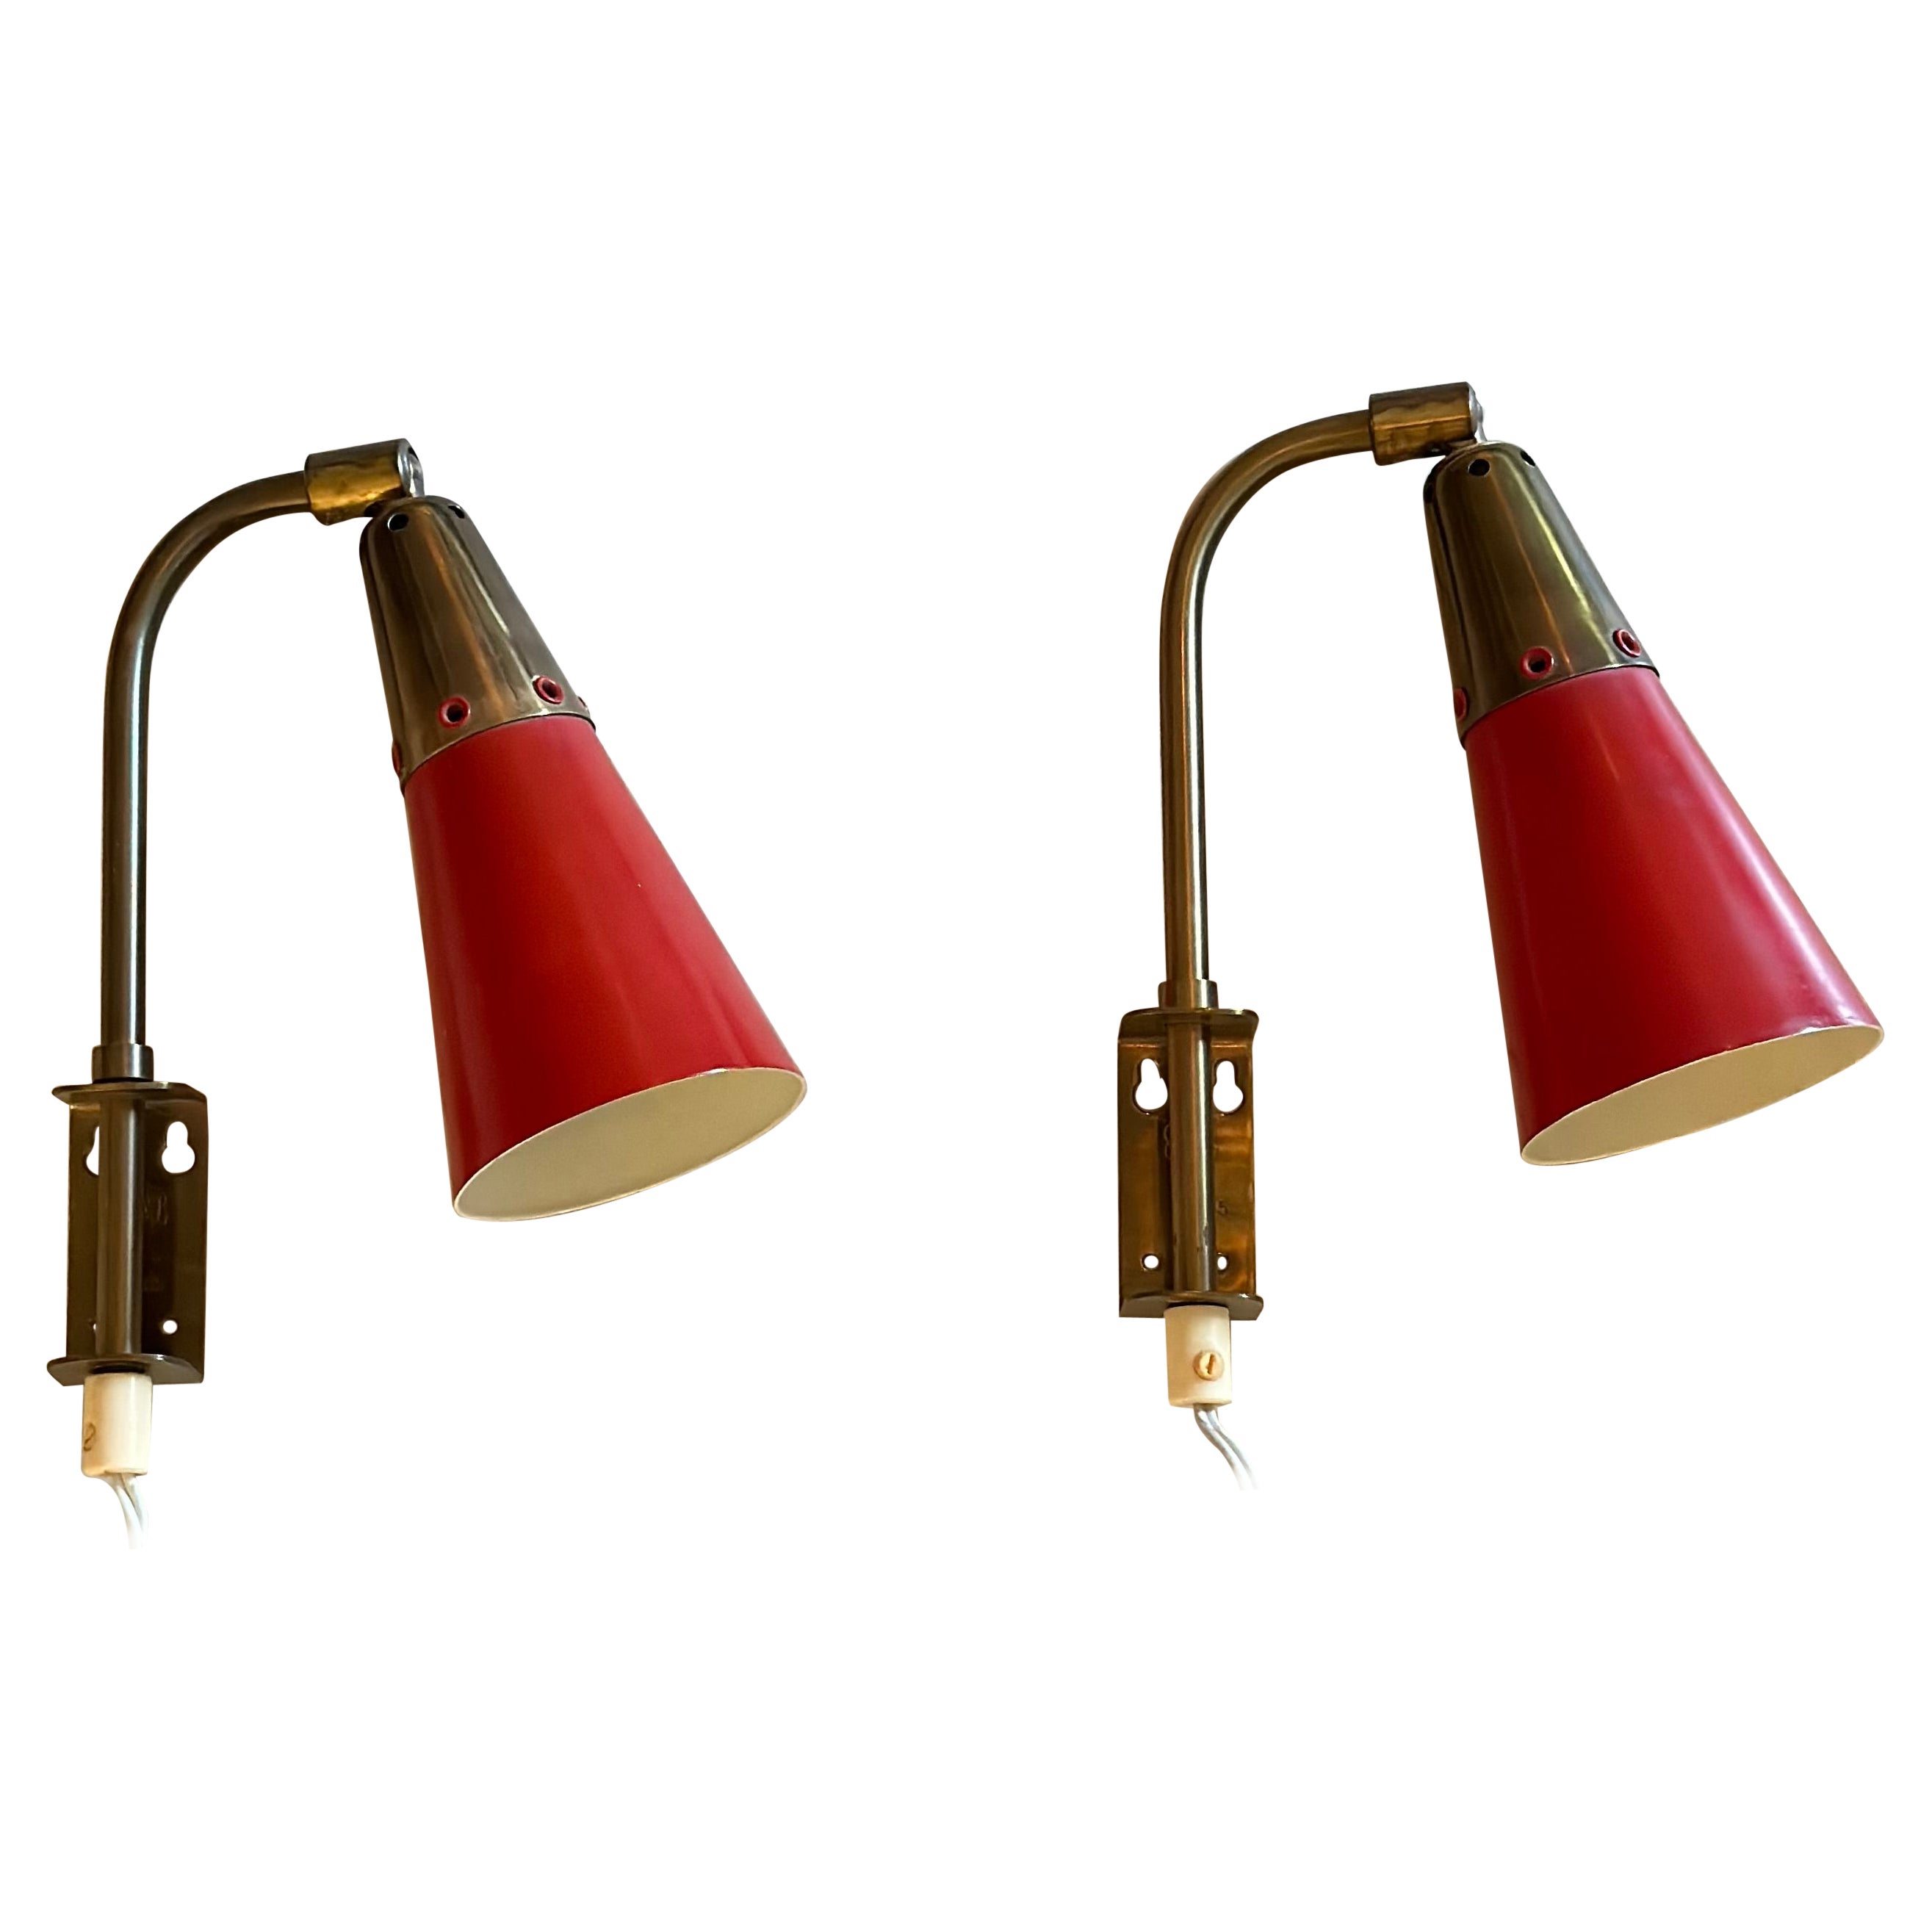 Swedish Modern Pair of Red Lacquer and Brass Wall Lights by Upsala Armaturfabrik For Sale